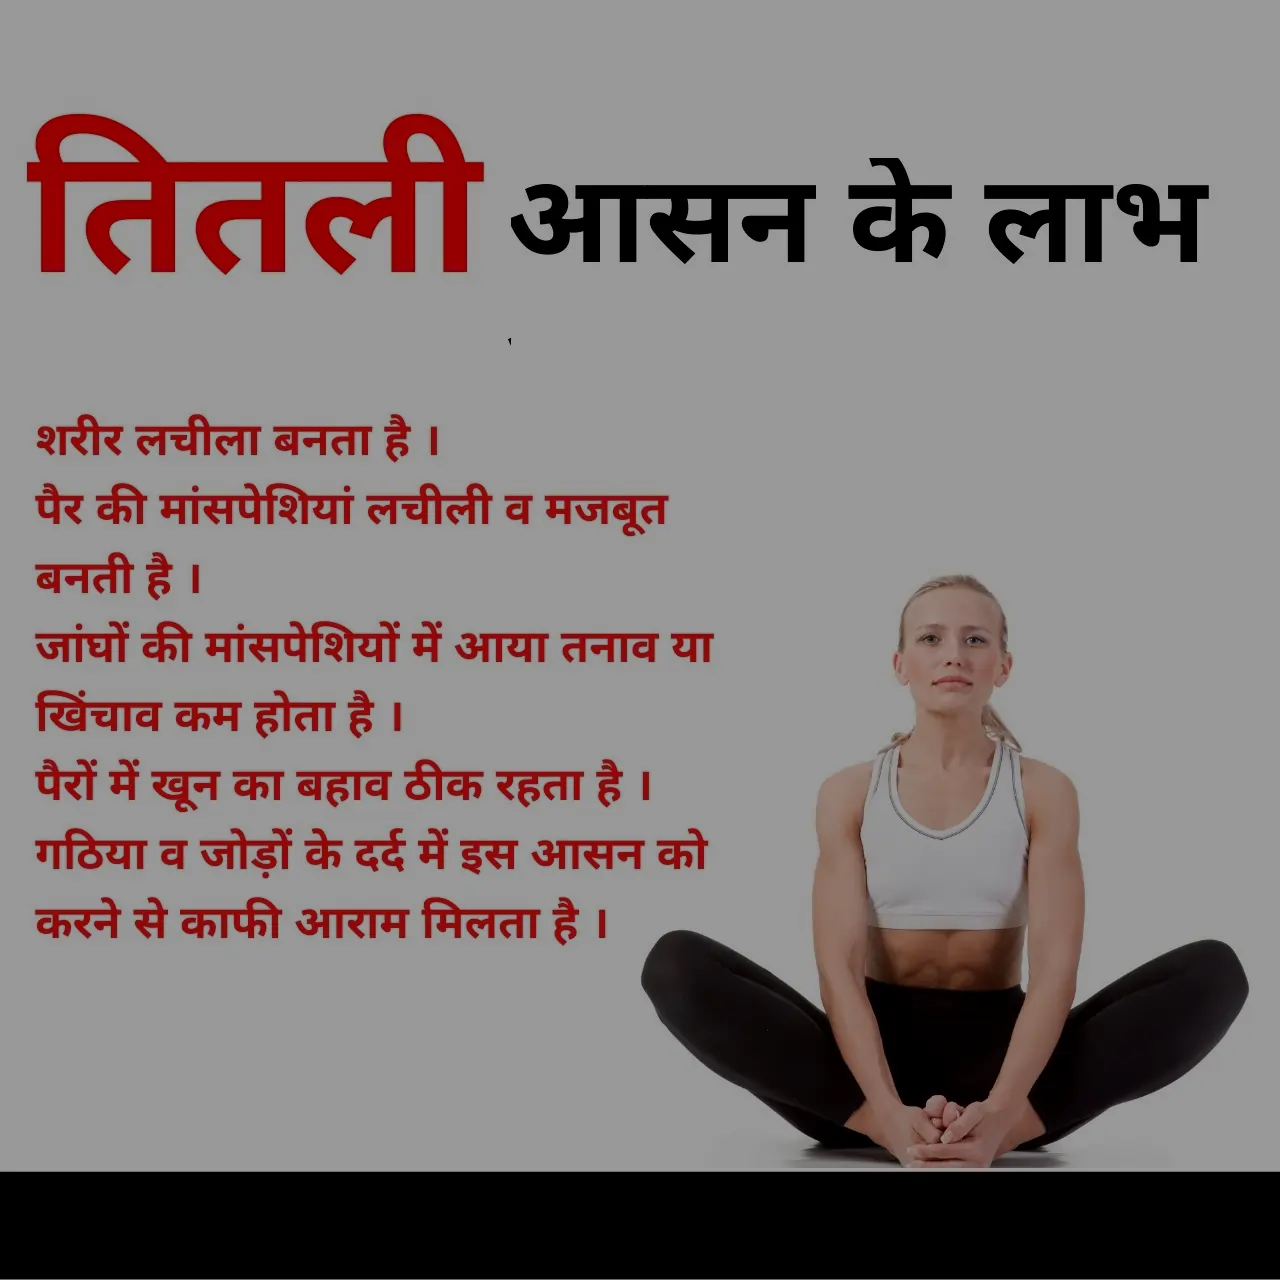 Ishan Ayurvedic Hospital - 🟢 #Baddha #Konasana is the advanced variation  of butterfly pose.It is an excellent practicing for cross-legged sitting  poses. 🔹Health Benefits 🔺Relieves urinary disorders 🔺Strong hip and  groin opener